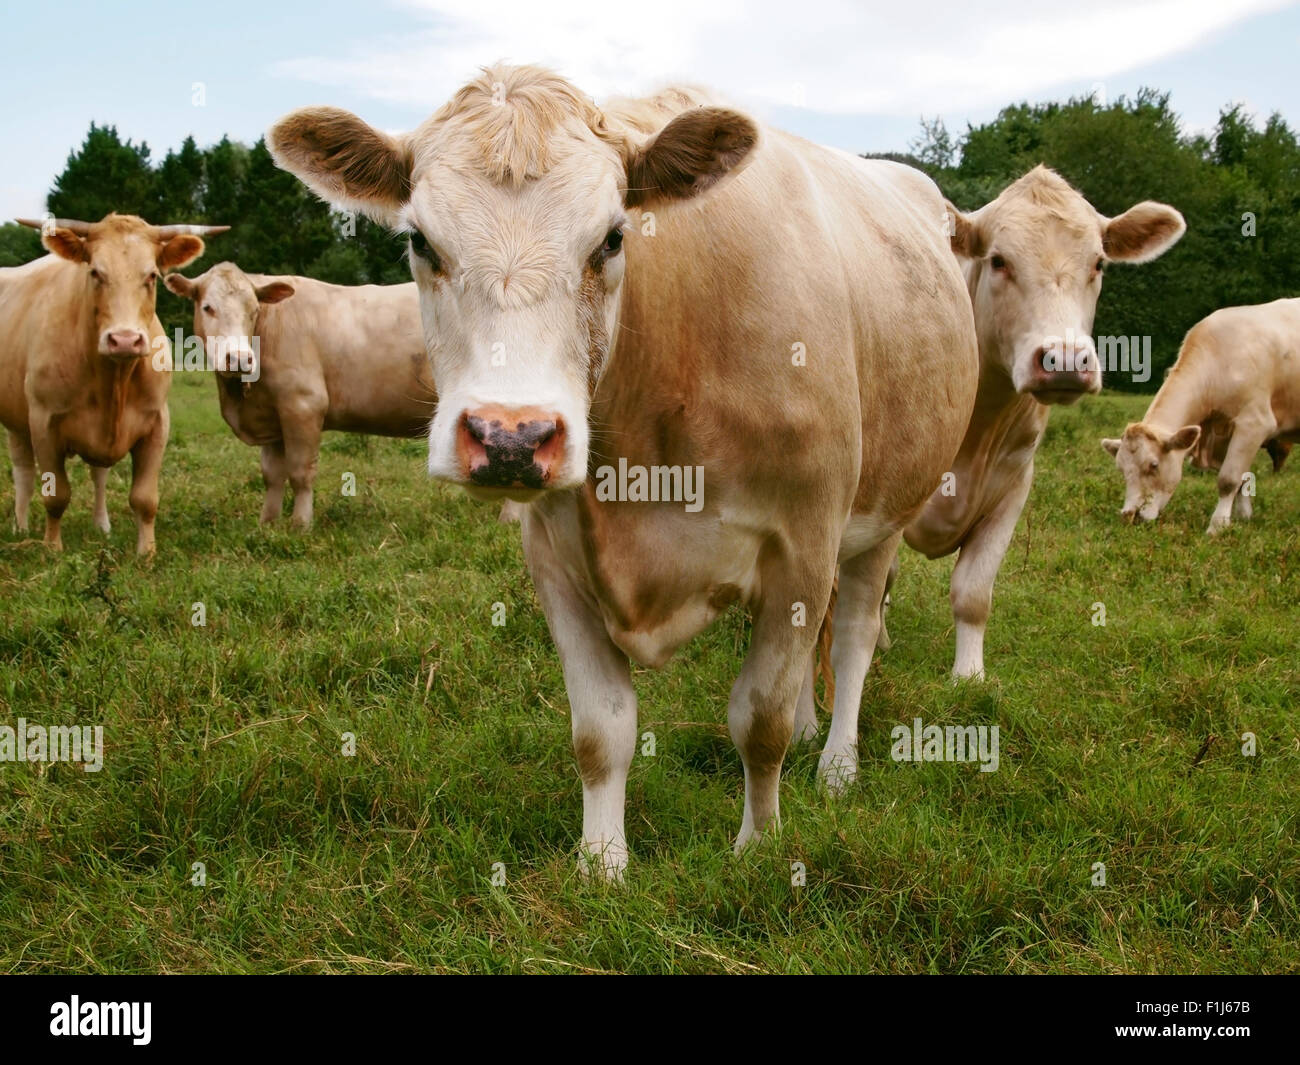 A group of cows stand in the grass staring curiously directly at the viewer. Stock Photo